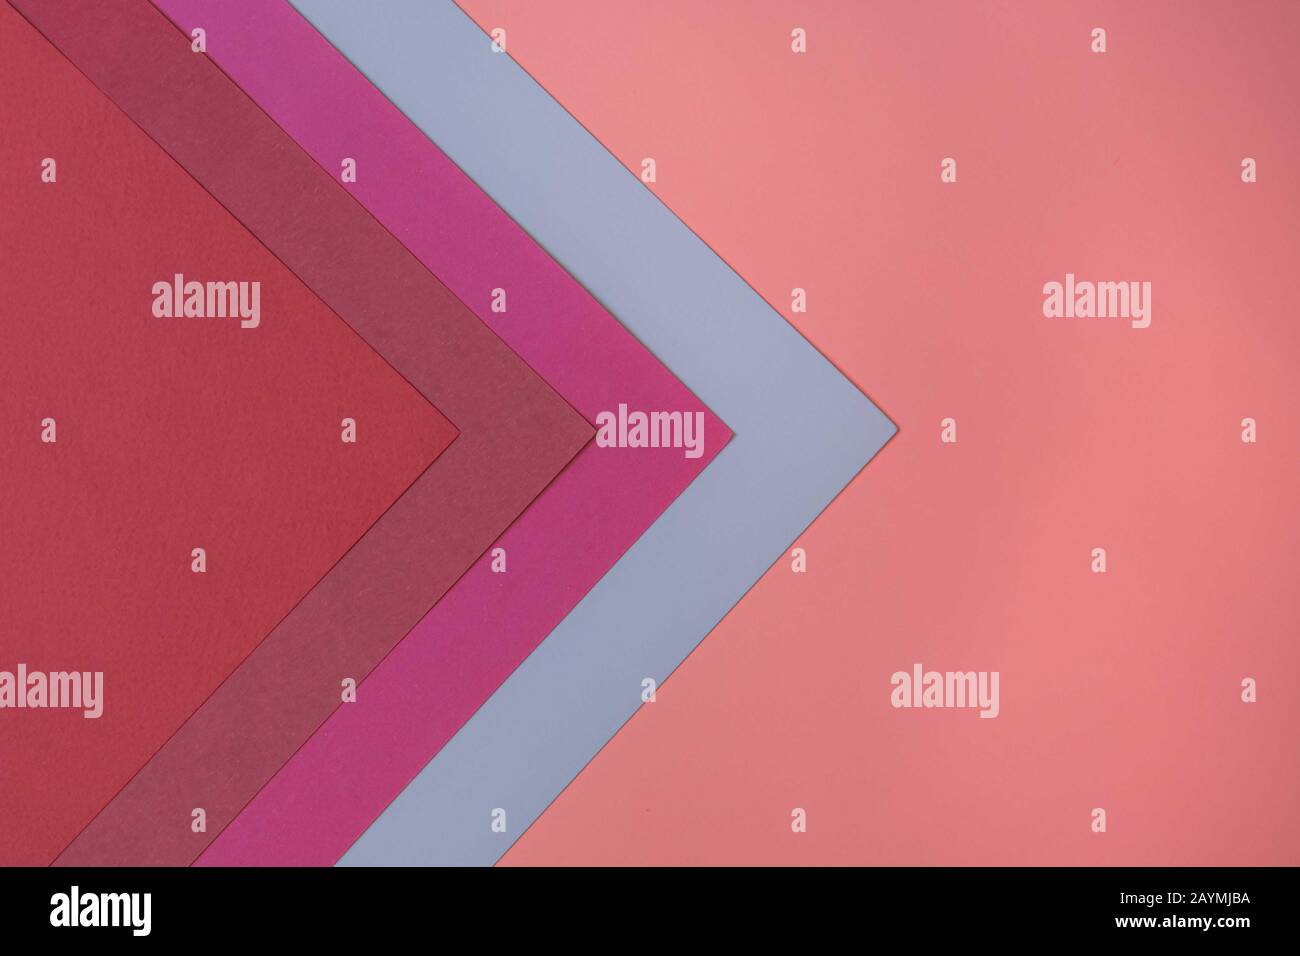 Abstract Geometric Colorful Paper Background. Color block concept. Stock Photo